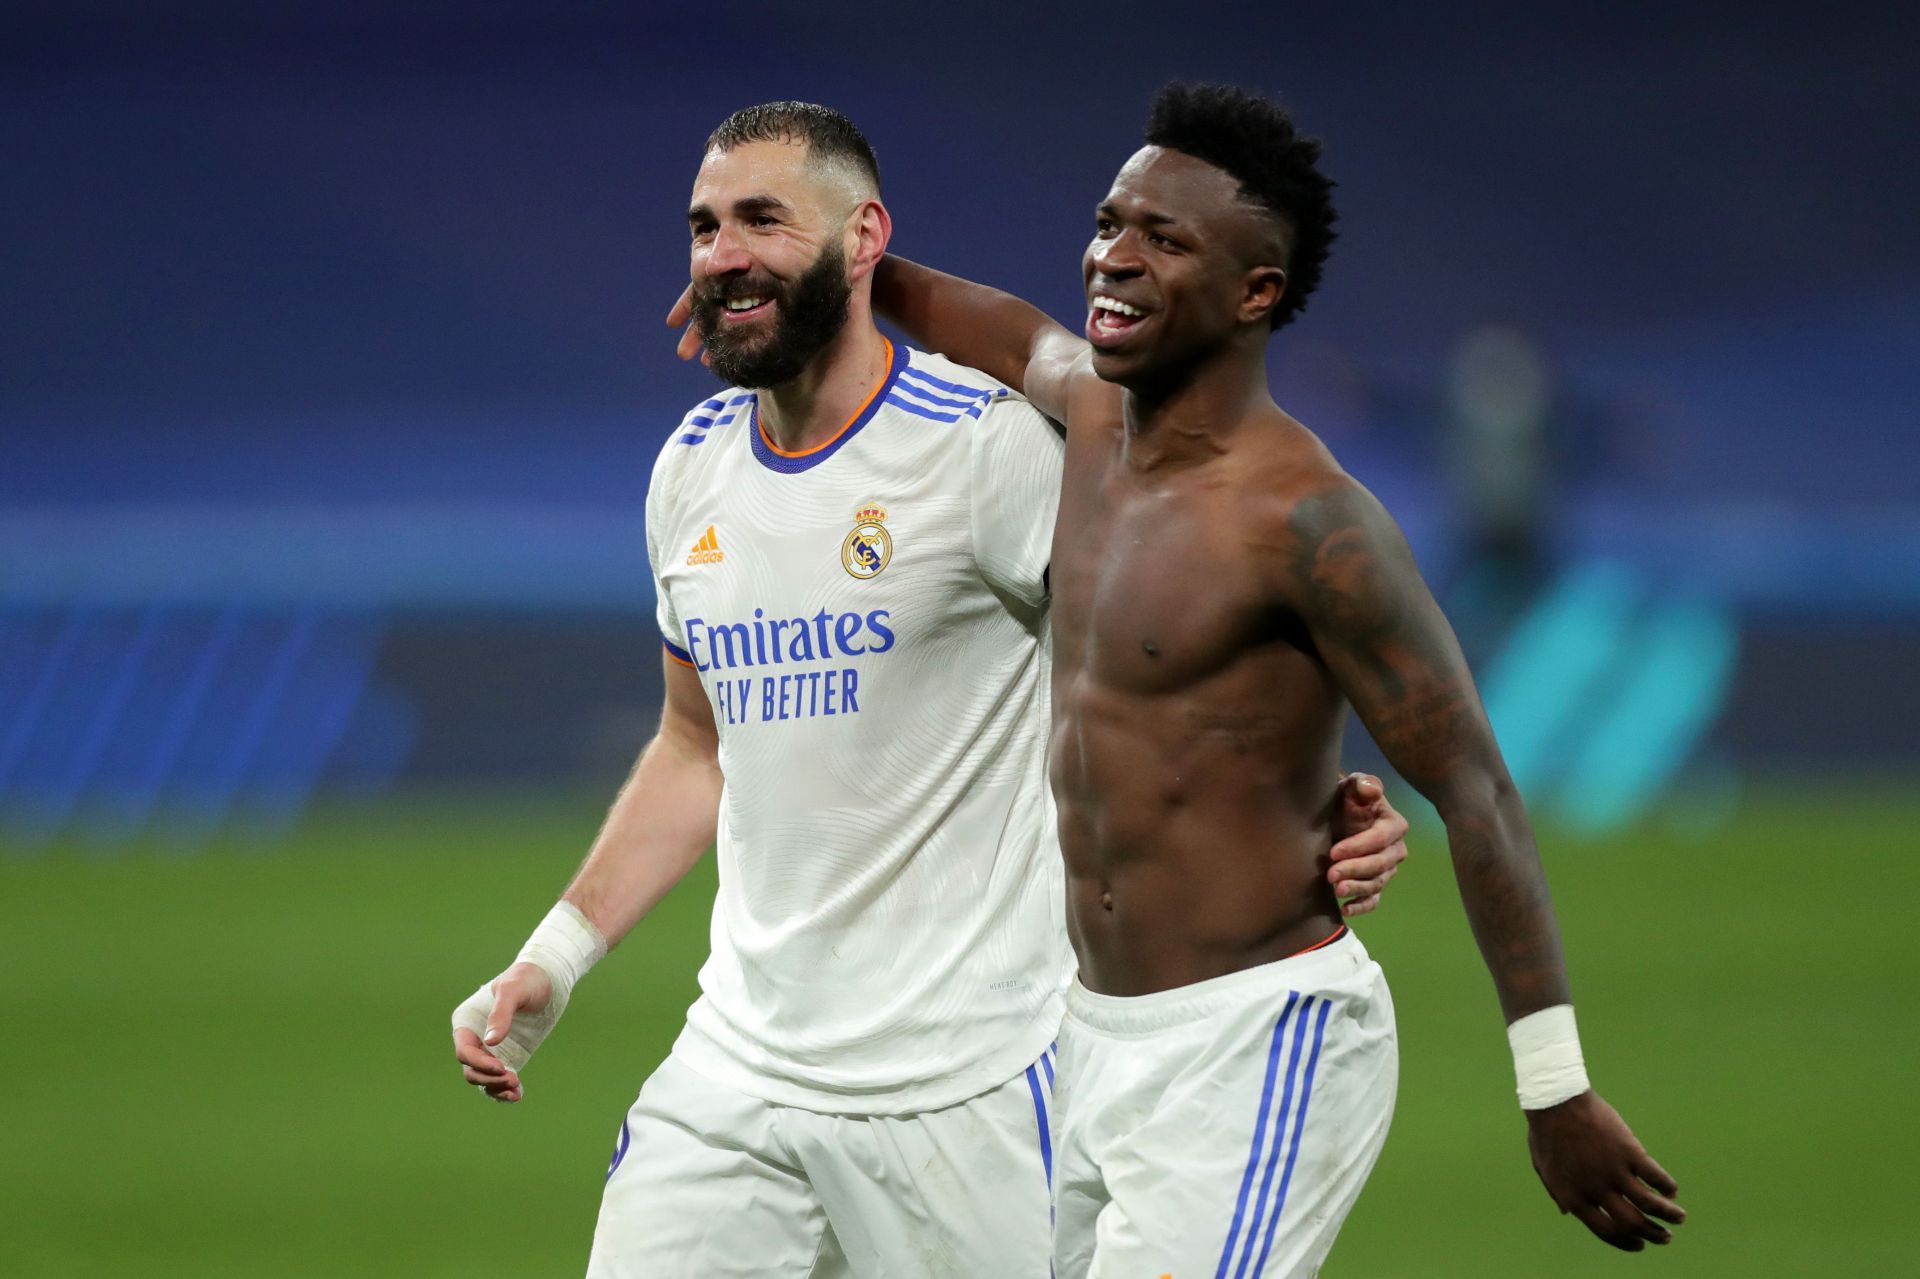 Karim Benzema and Vinicius Junior can be dangerous against Chelsea in the Champions League